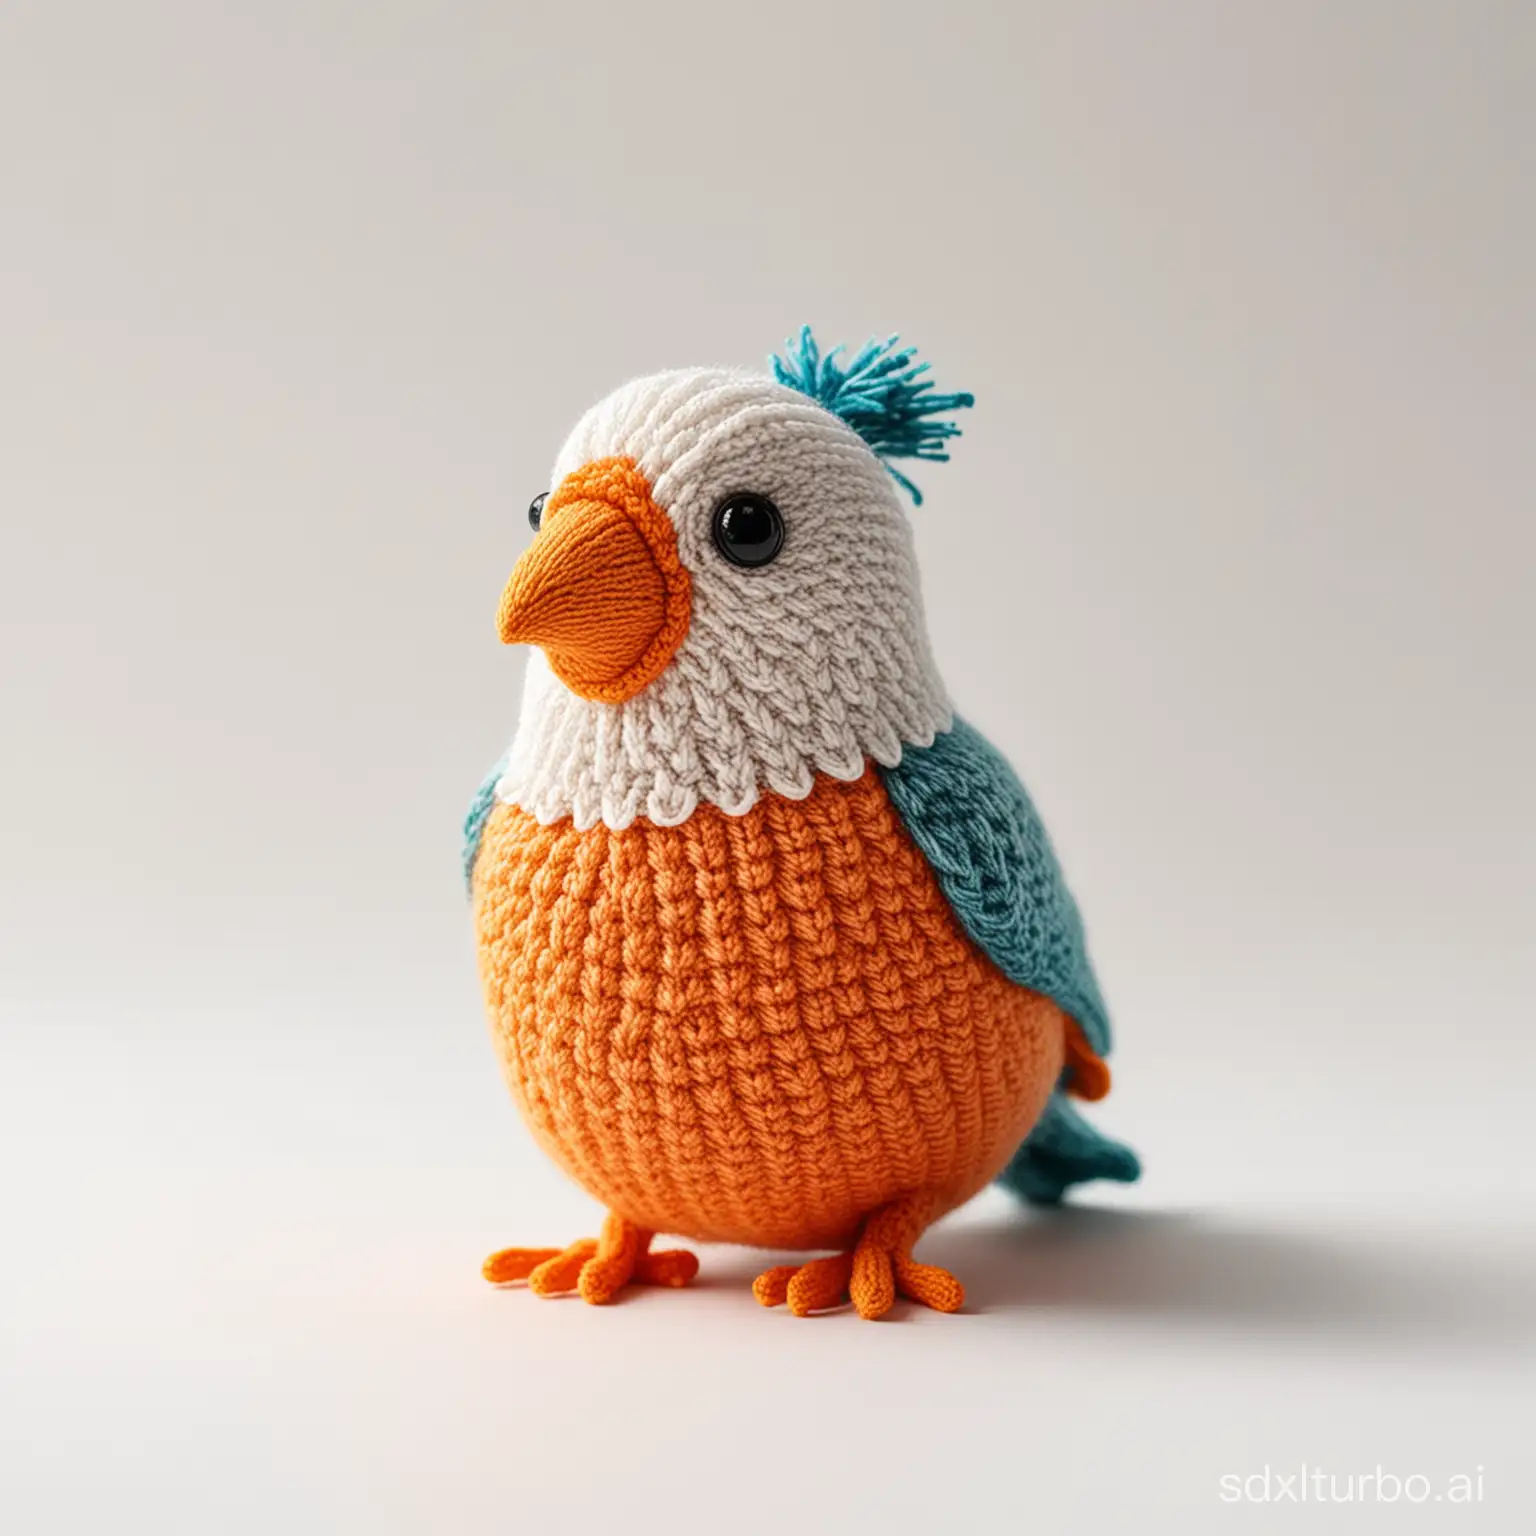 cute realistic knitted Bird, on a white background, in the style of product photography, knit art, colorful design